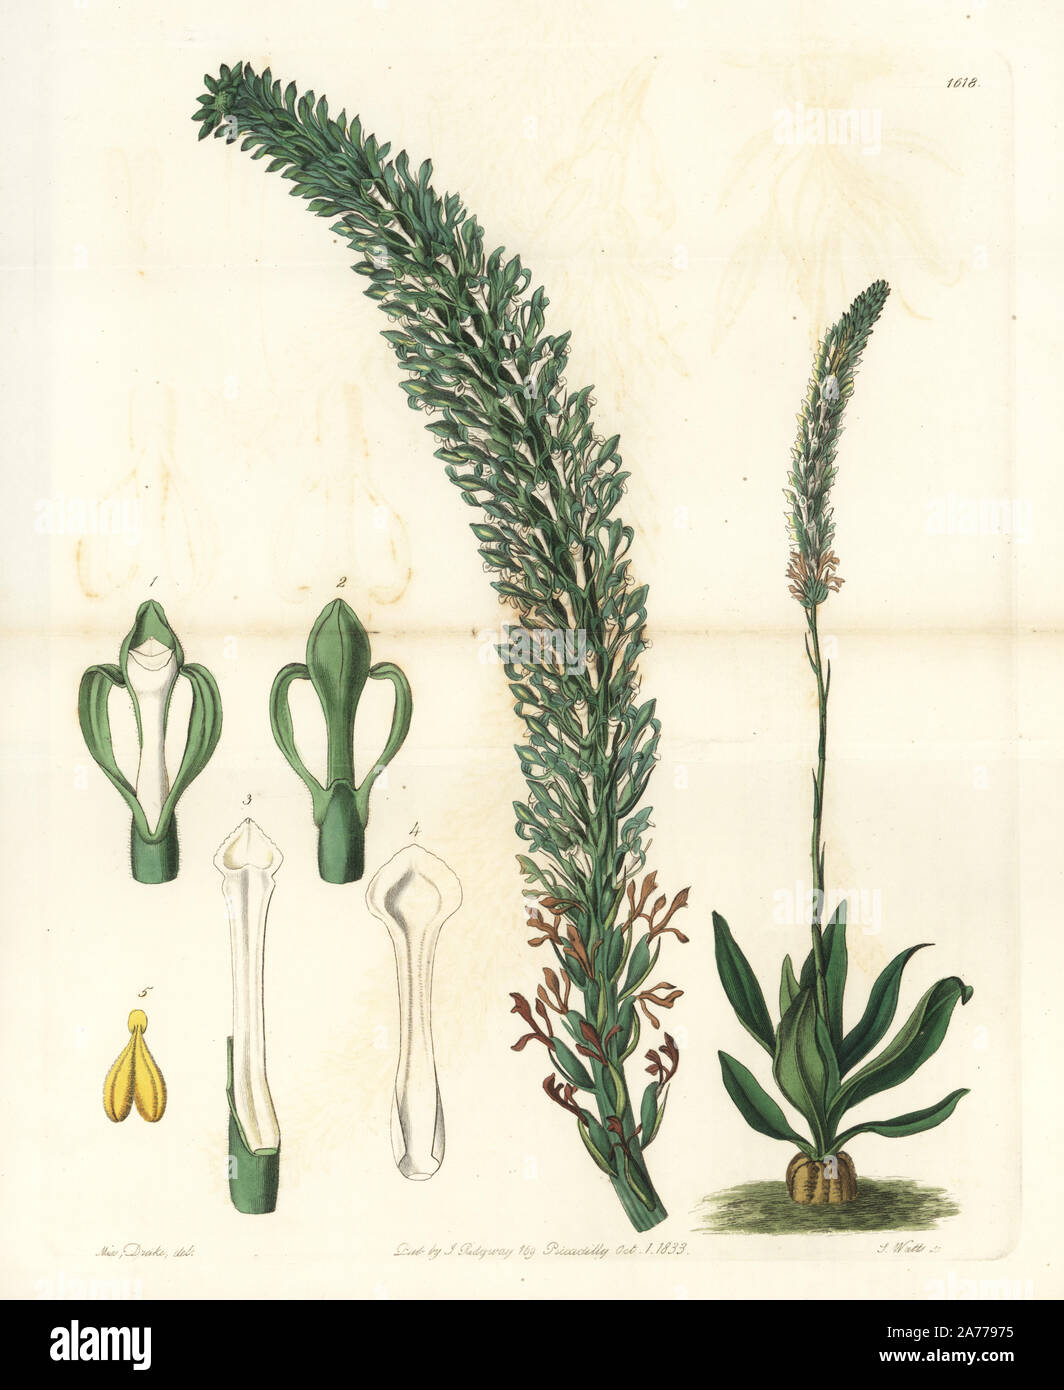 Lizard's tongue orchid, Sauroglossum nitidum. Tall lizard's tongue, Sauroglossum elatum. Handcoloured copperplate engraving by S. Watts after an illustration by Miss Drake from Sydenham Edwards' 'The Botanical Register,' London, Ridgway, 1833. Sarah Anne Drake (1803-1857) drew over 1,300 plates for the botanist John Lindley, including many orchids. Stock Photo